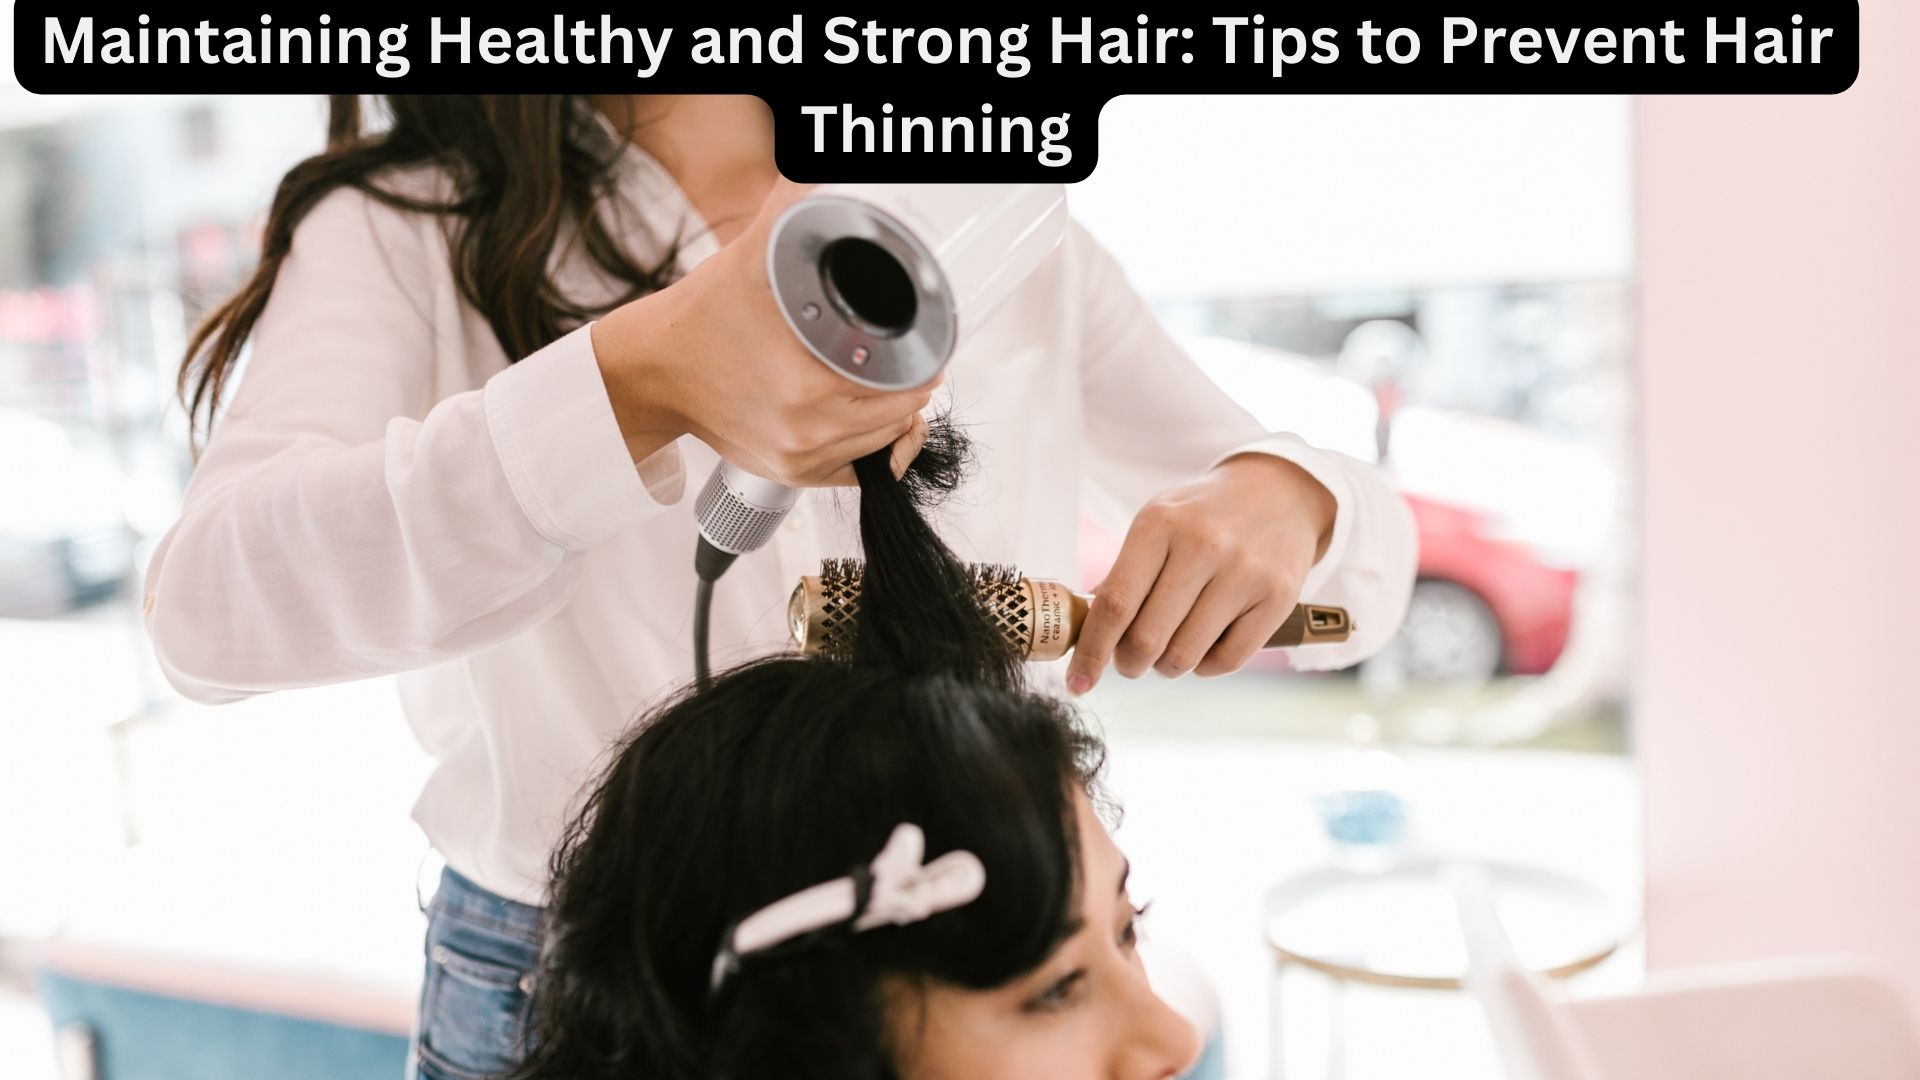 Maintaining Healthy and Strong Hair: Tips to Prevent Hair Thinning